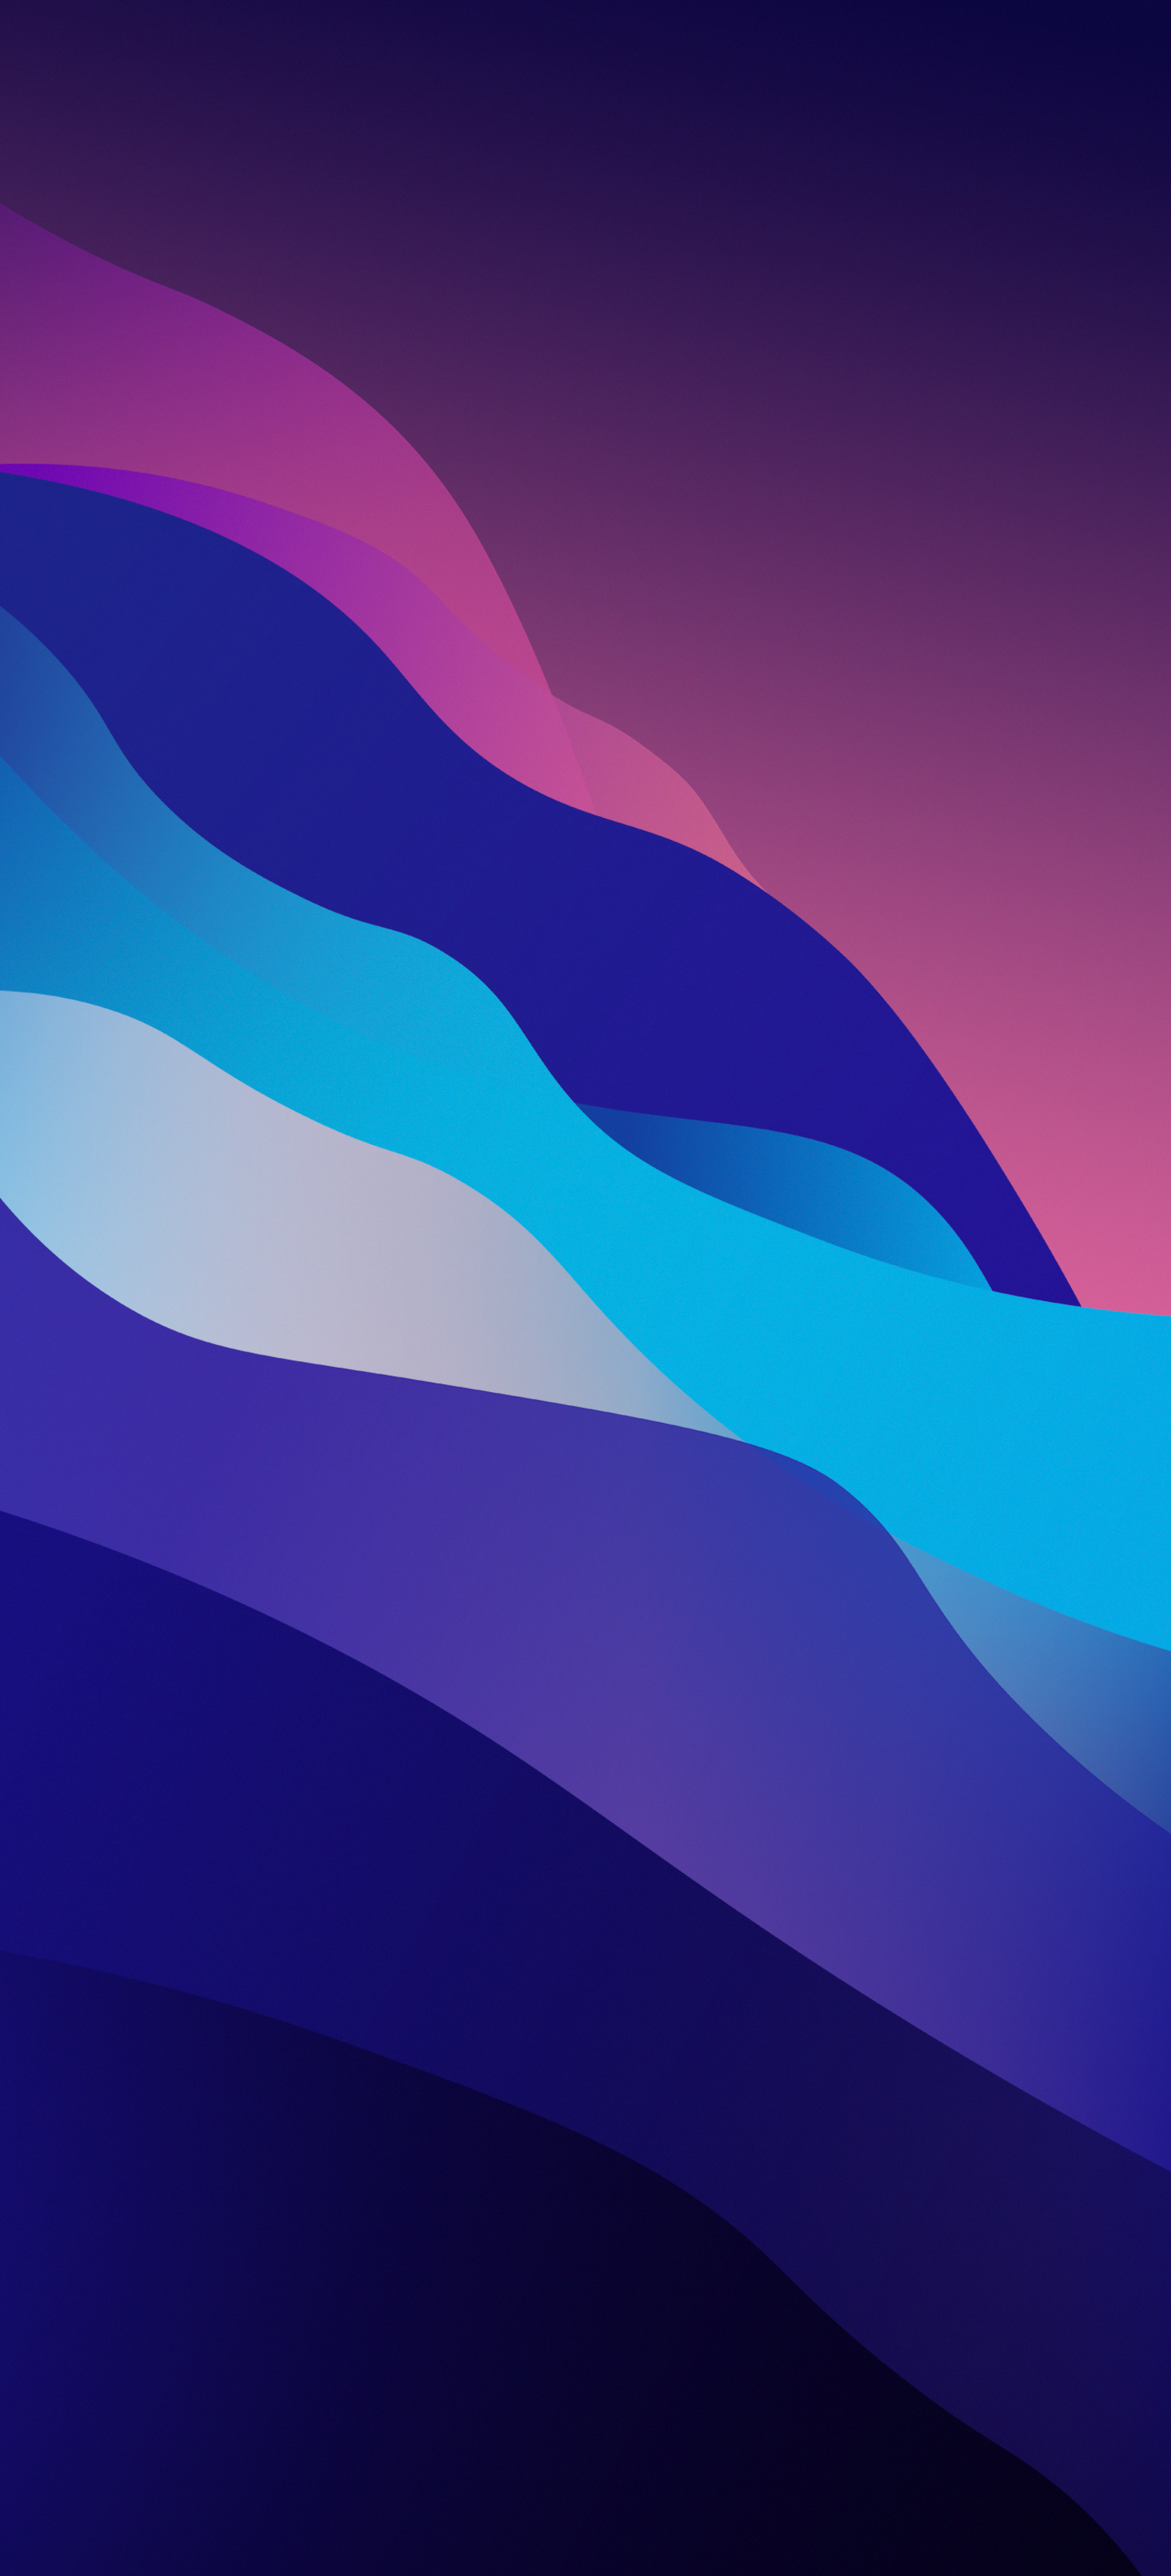 macOS Monterey inspired “Waves” wallpaper for iPhone